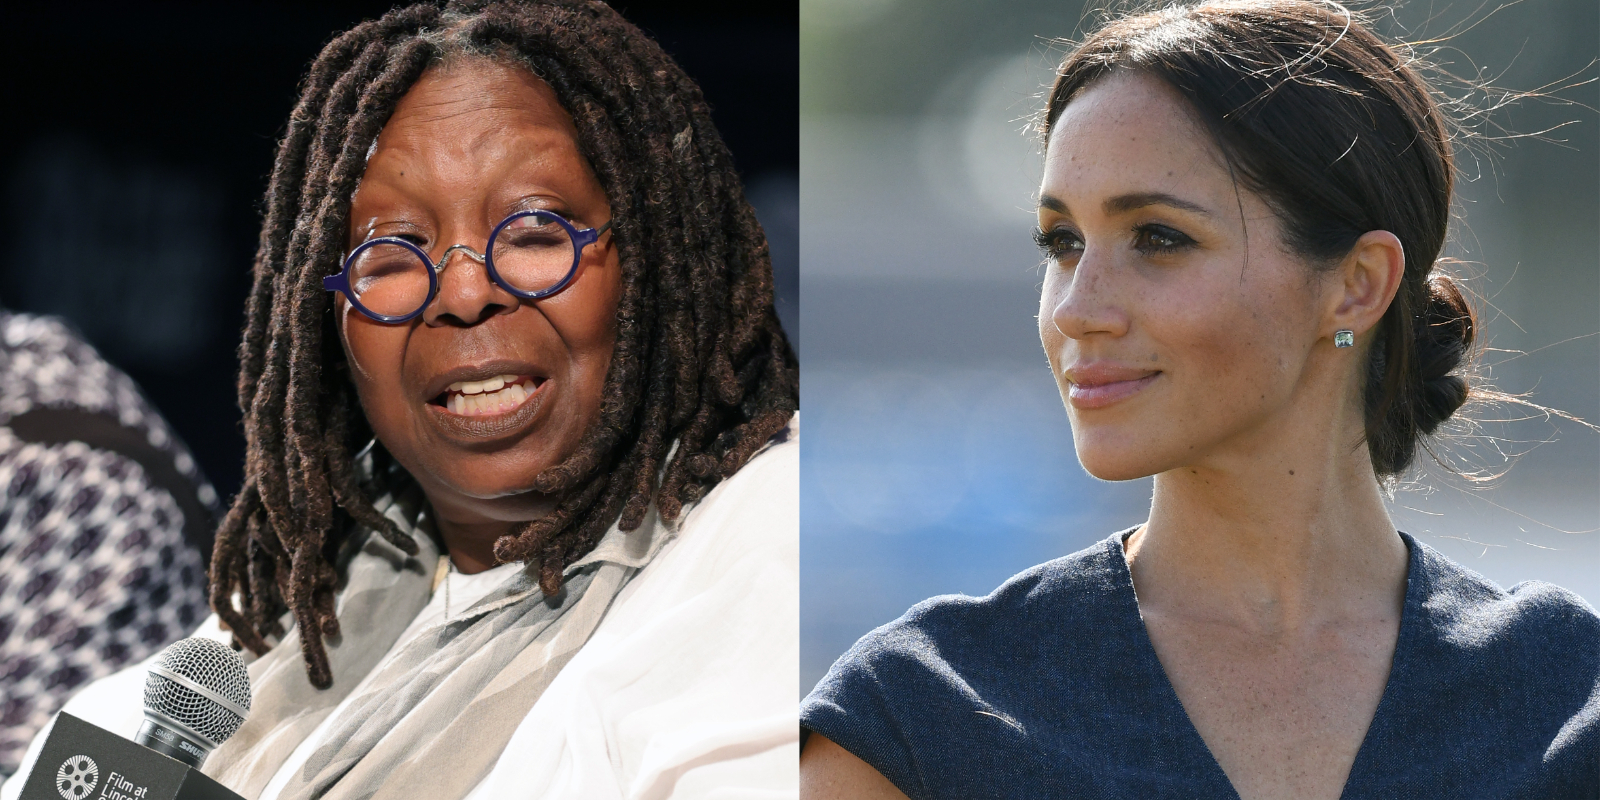 ‘The View’: Whoopi Goldberg Says ‘When You’re a Performer You Take the Gig’ After Meghan Markle Claims She Felt Objectified on ‘Deal or No Deal’